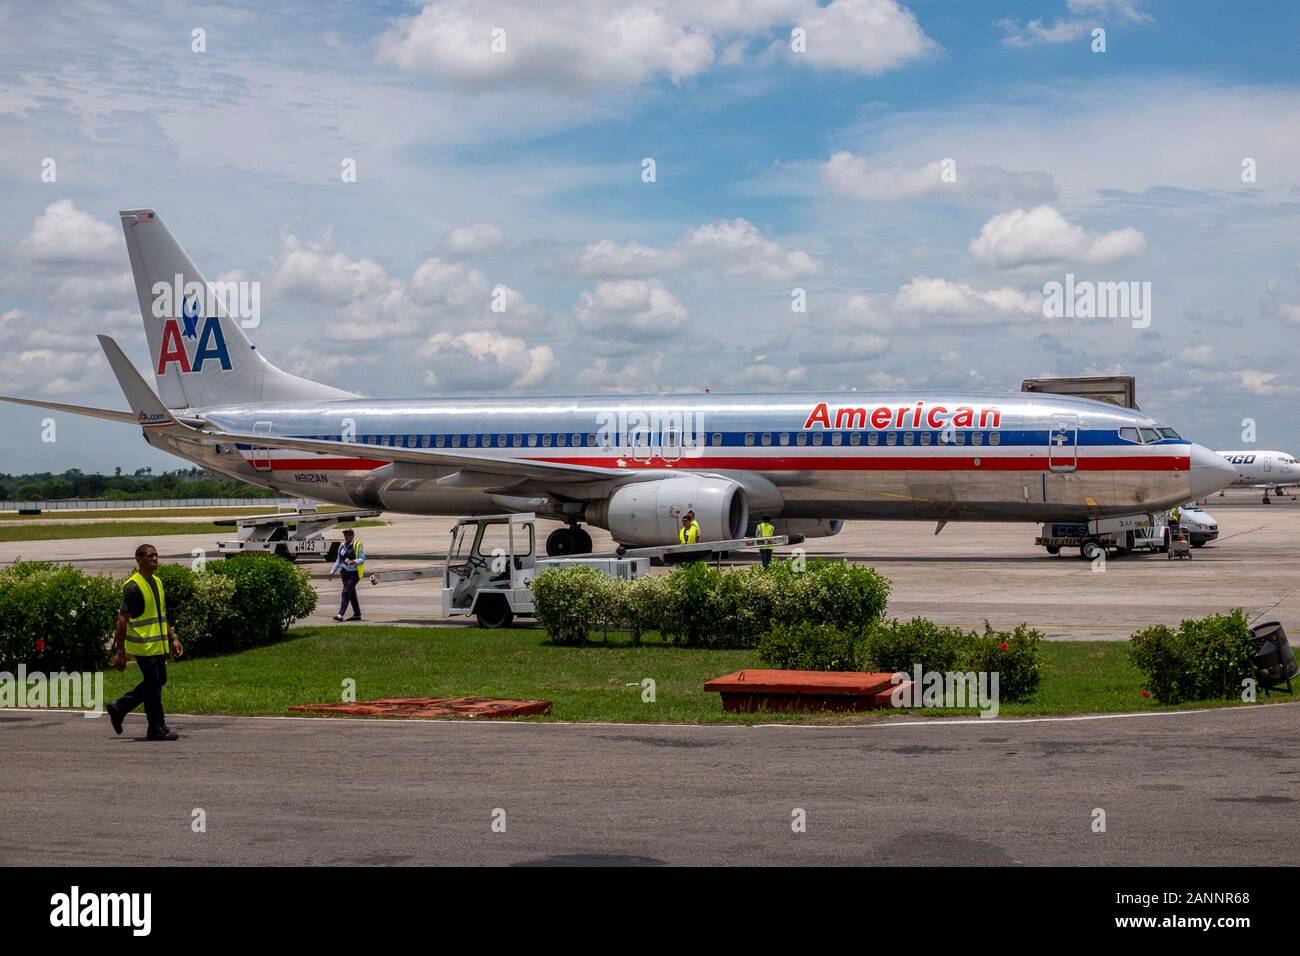 Havana Airport High Resolution Stock Photography and Images - Alamy